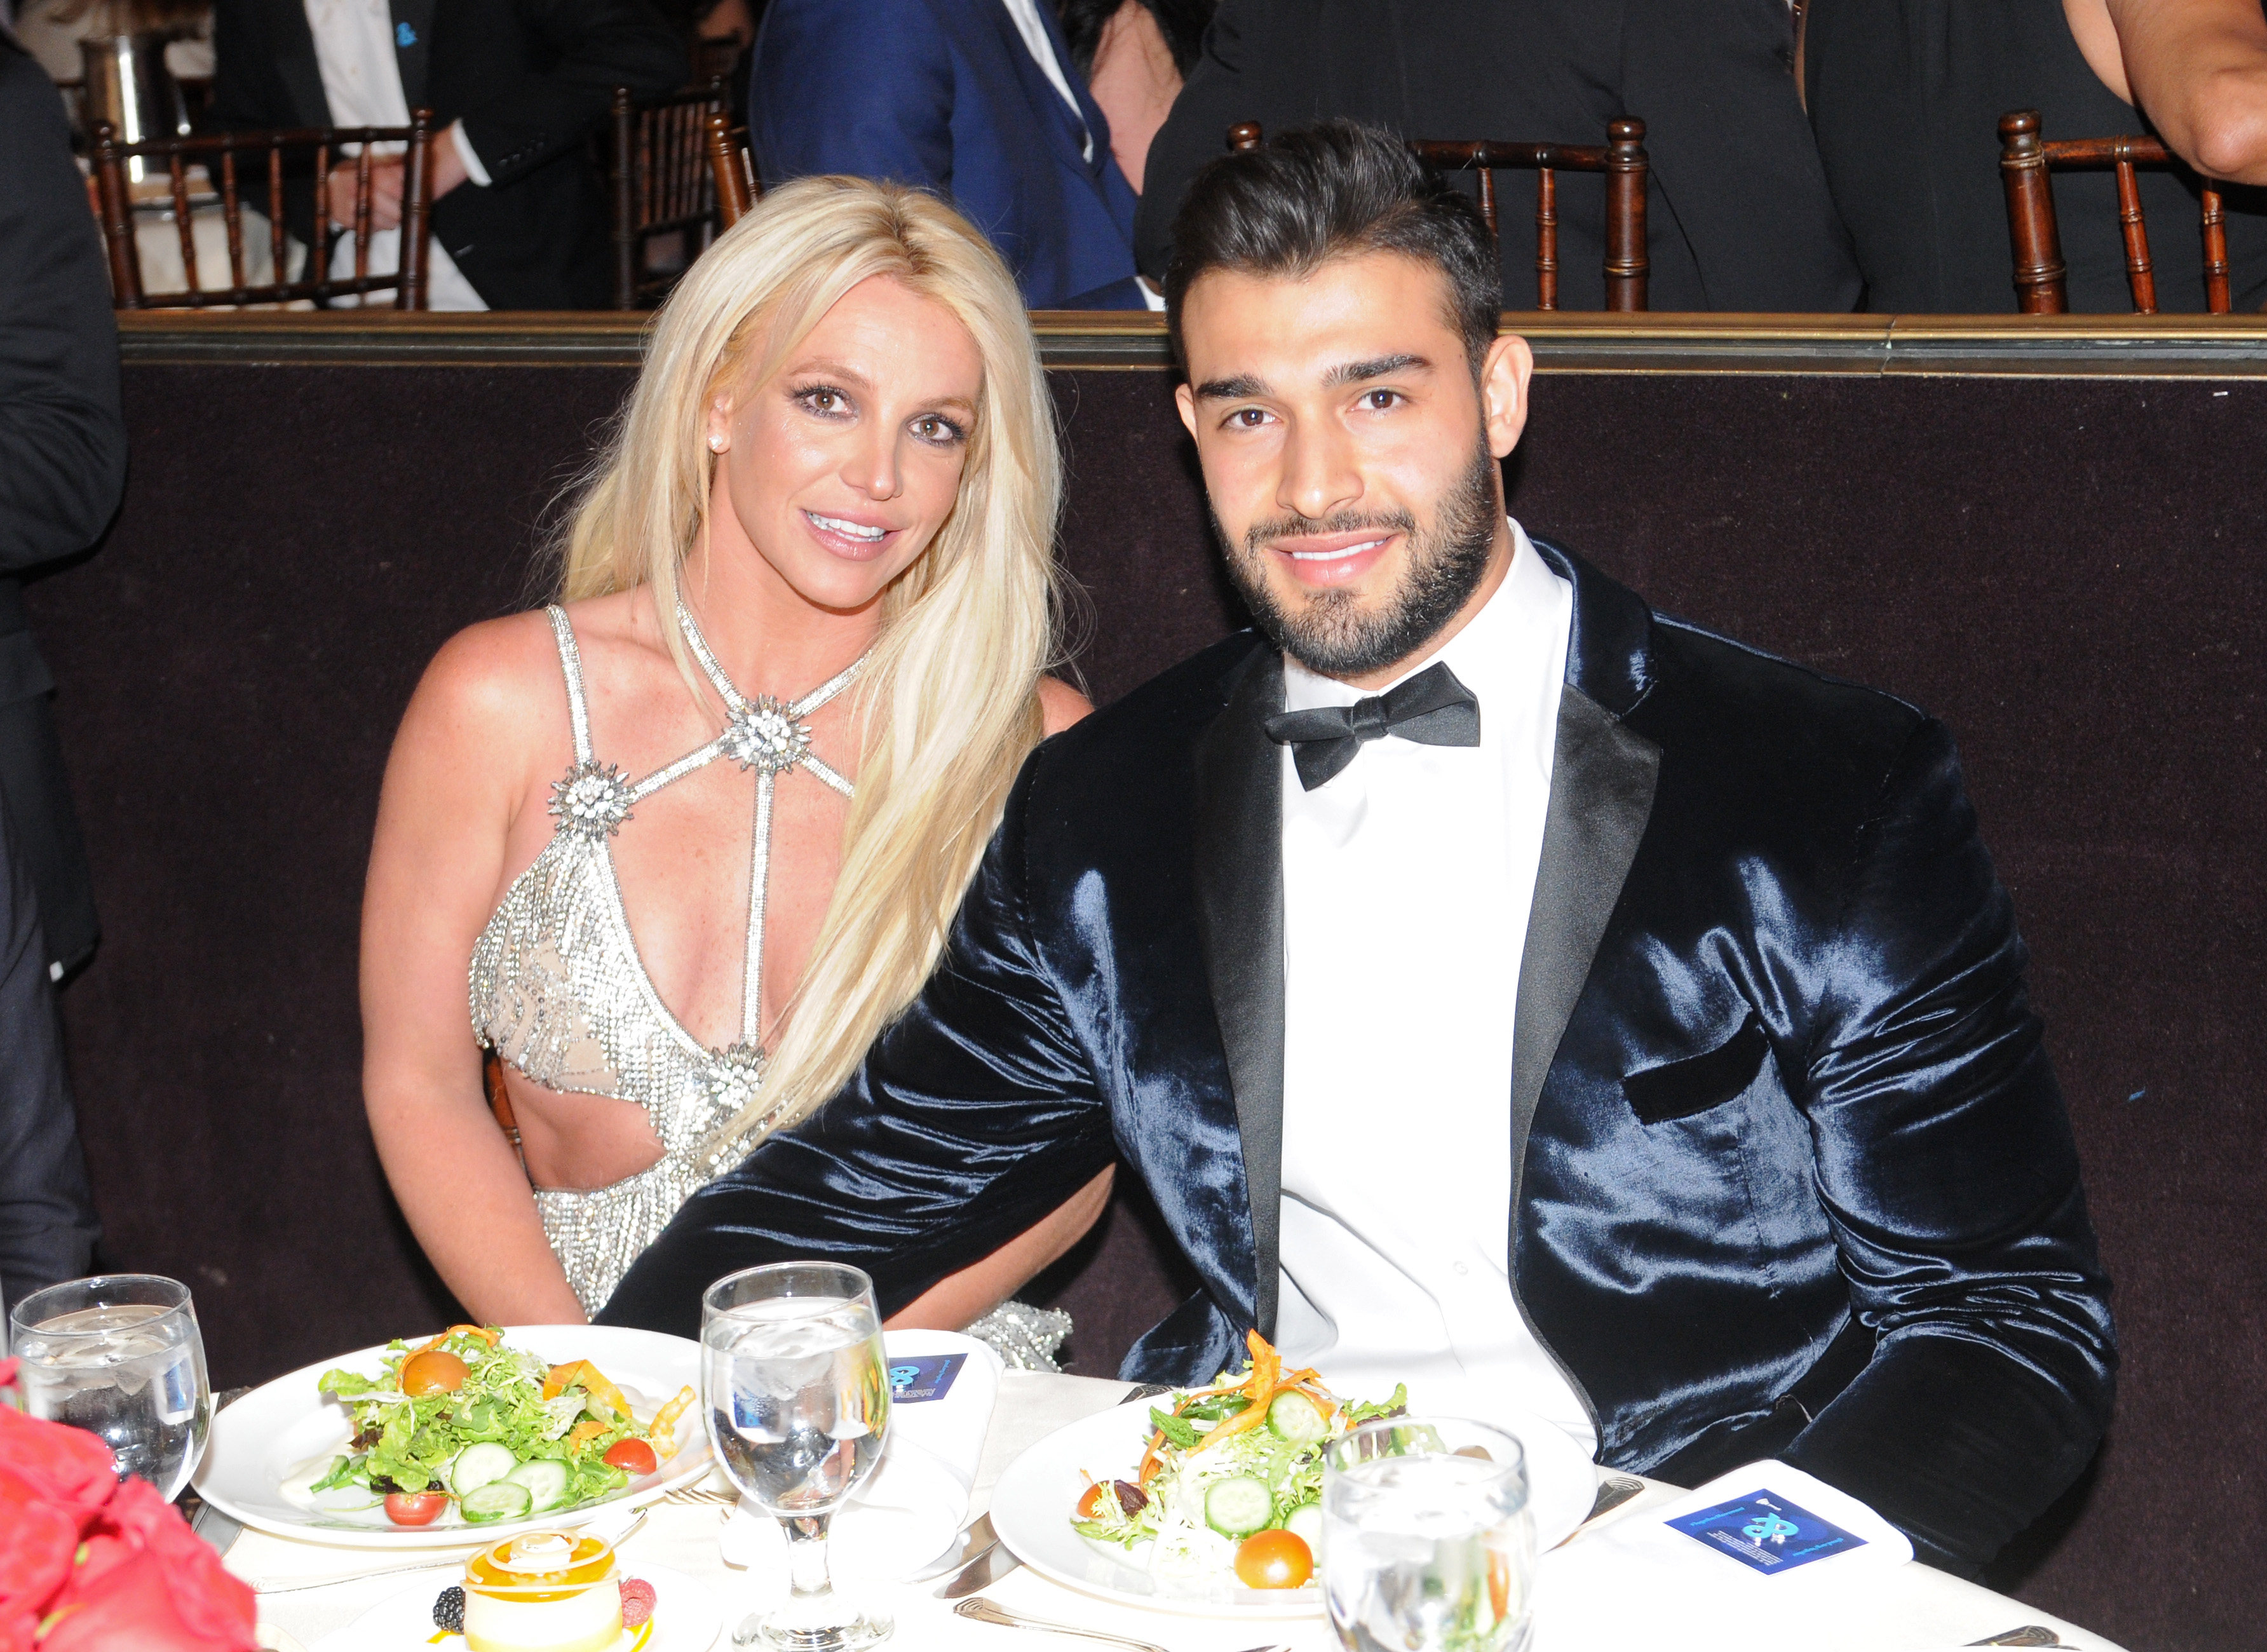 Britney Spears and Sam Asghari attend a gala event in Beverly Hills, California. File photo: Getty Images/TNS